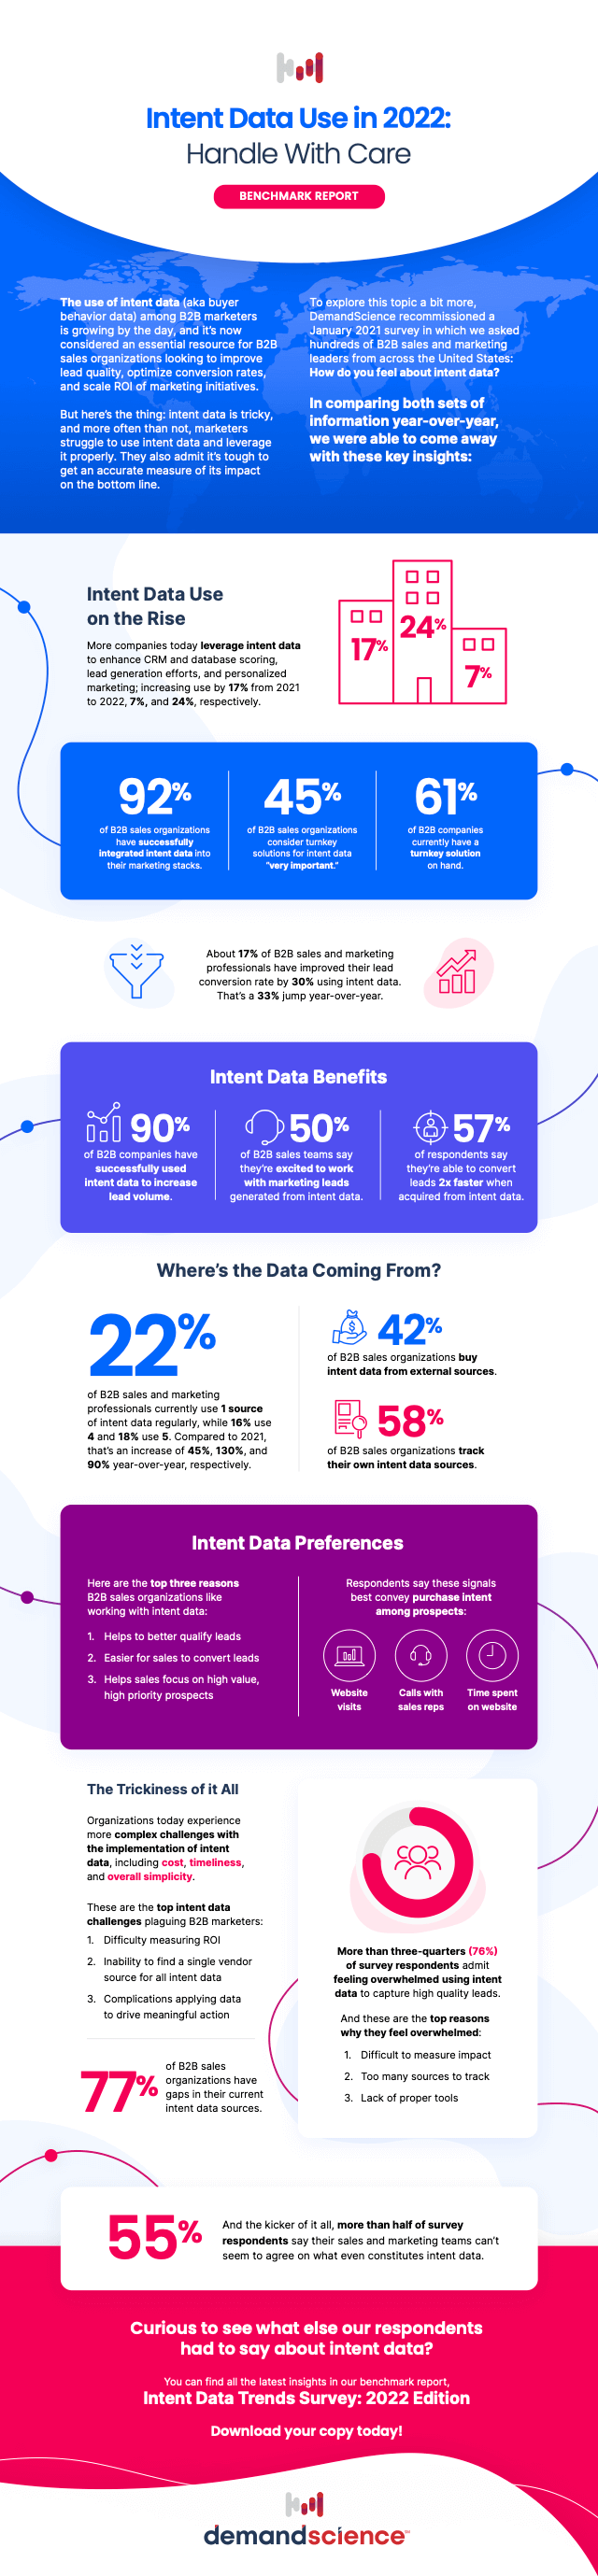 Intent Data Trends: 2022 Edition